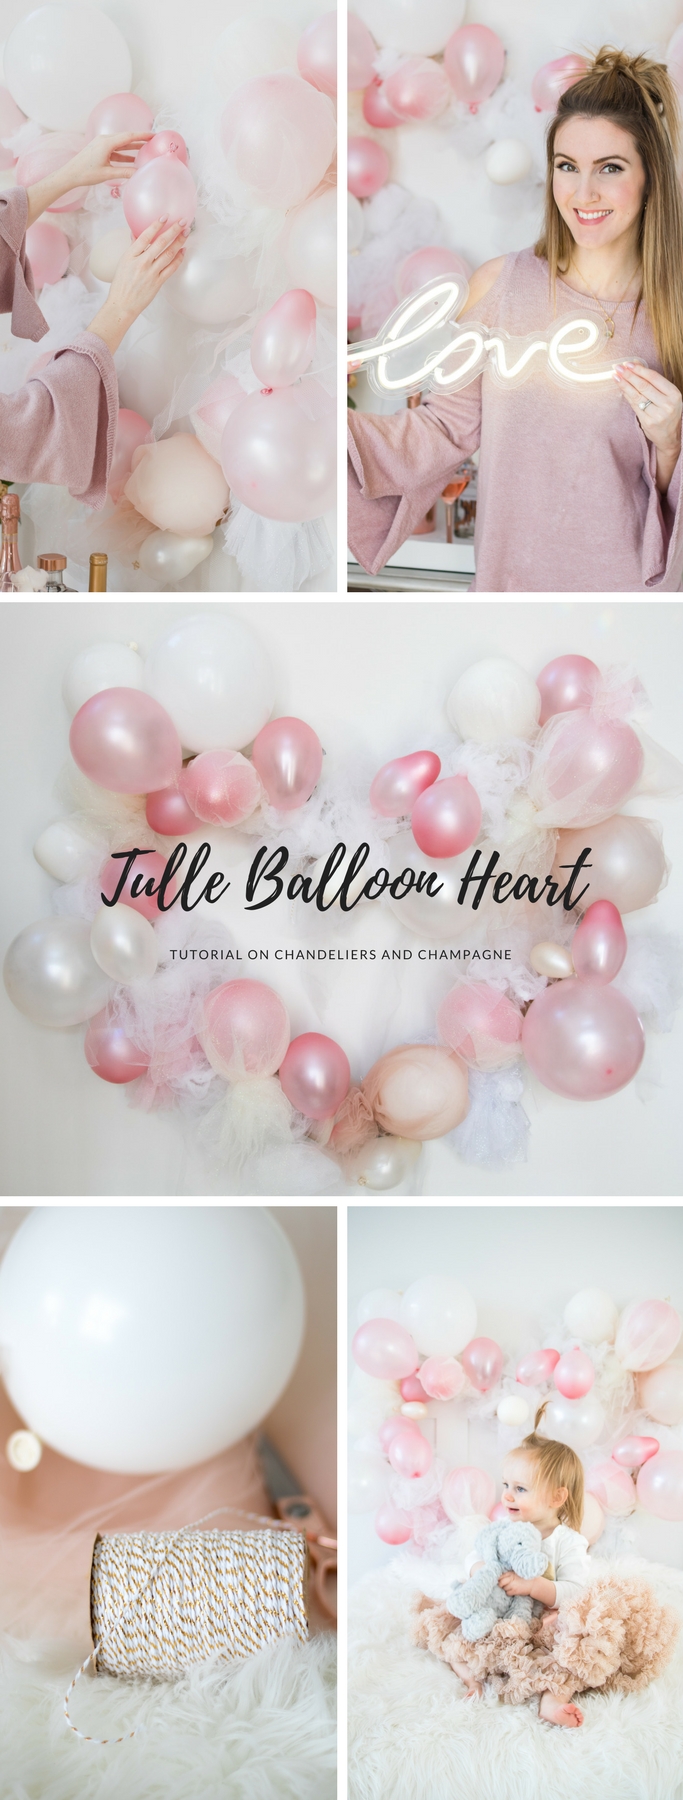 Tulle Balloon Heart Tutorial for Valentine's Day now posted on Chandeliers and Champagne! 